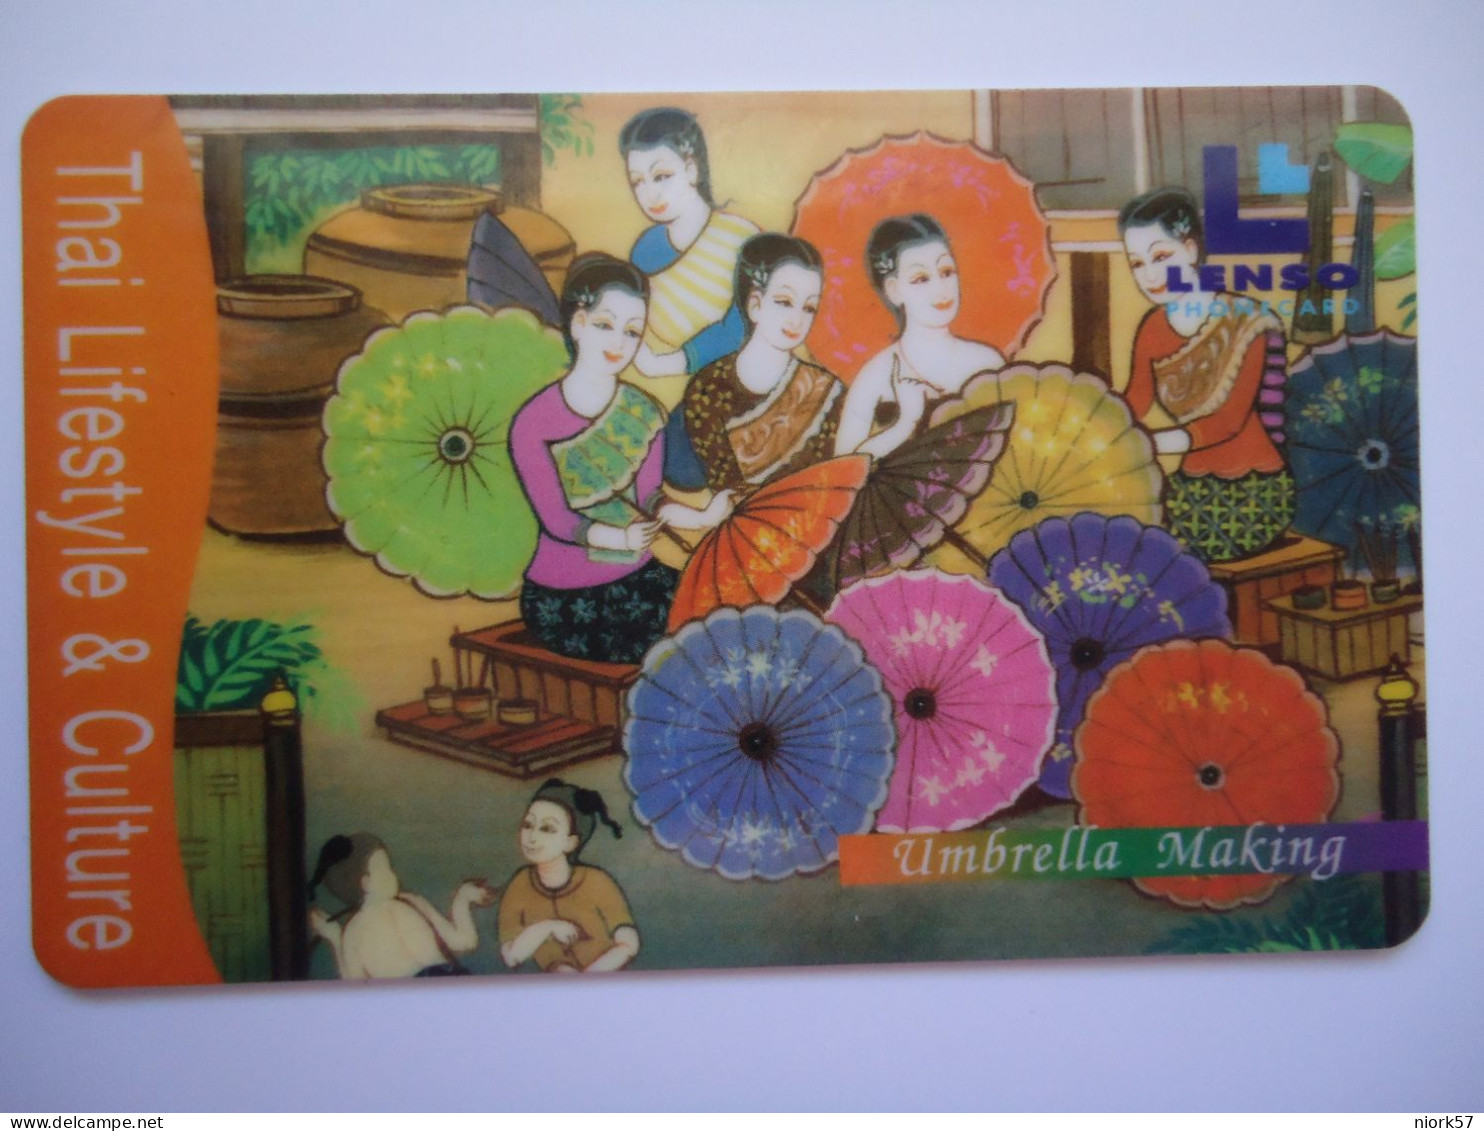 THAILAND CARDS LENSO USED  WOMEN 169/300  CULTURE - Cultural